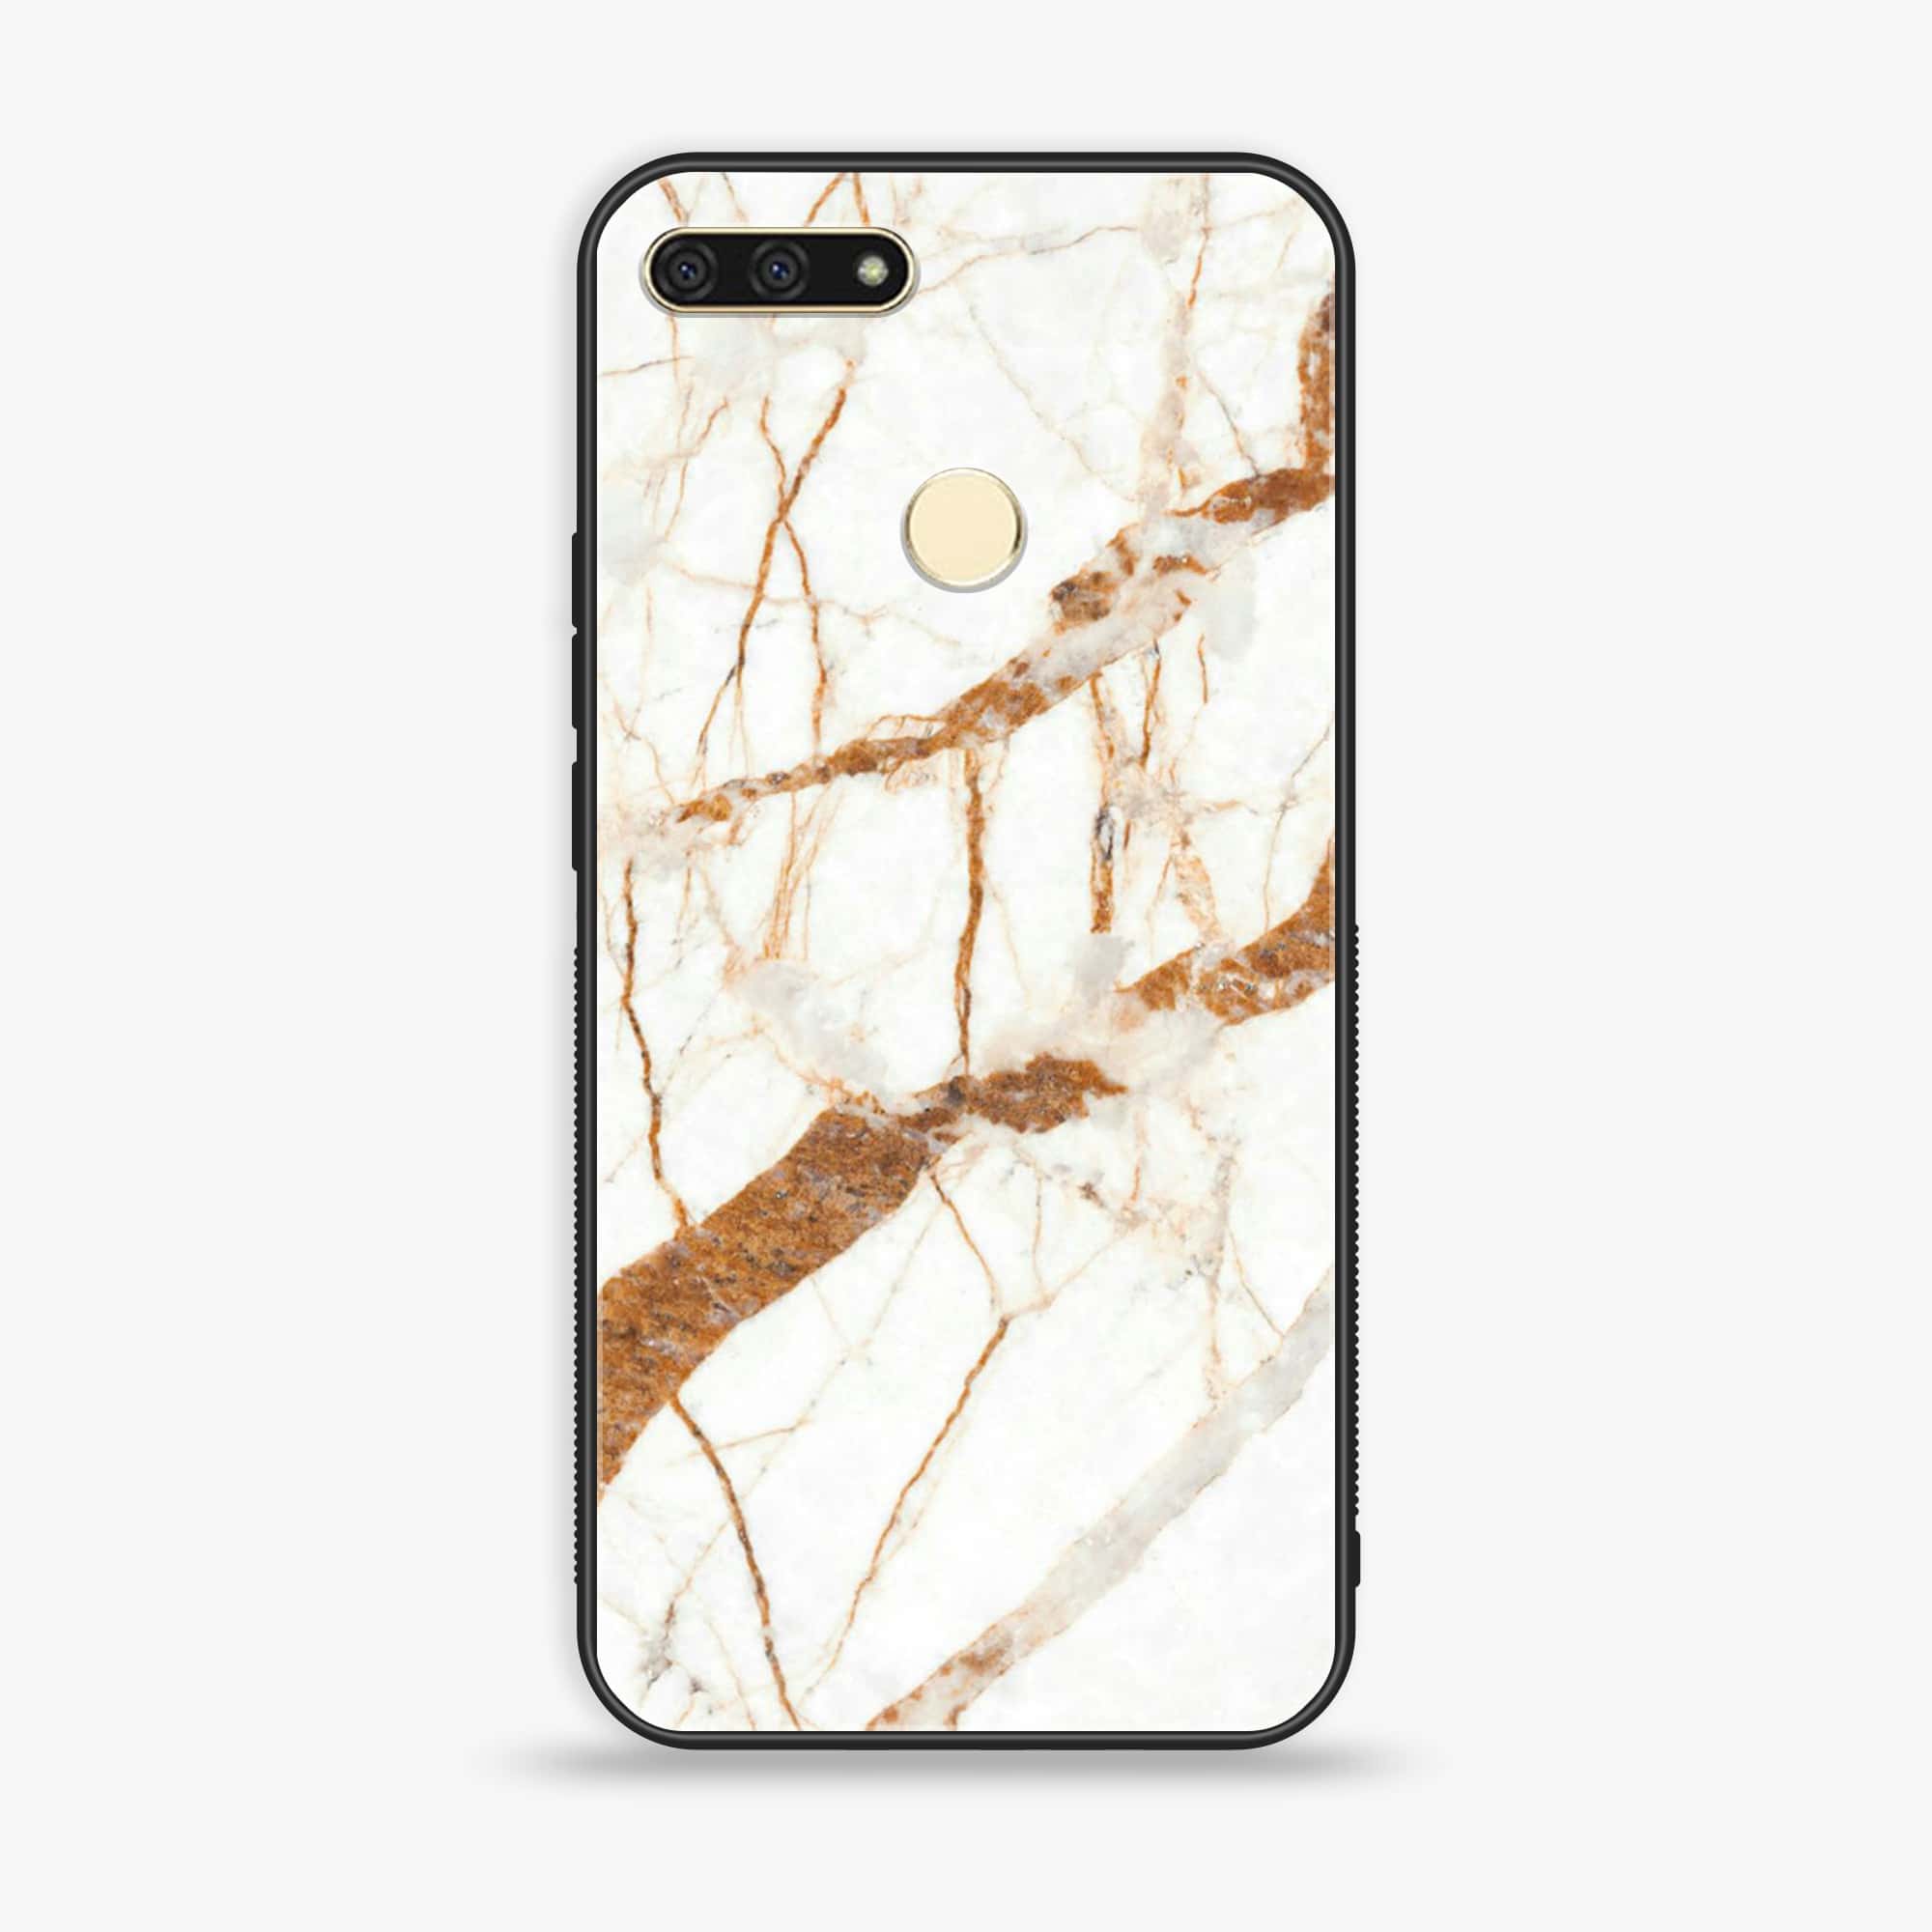 Honor 7A -  White Marble Series - Premium Printed Glass soft Bumper shock Proof Case